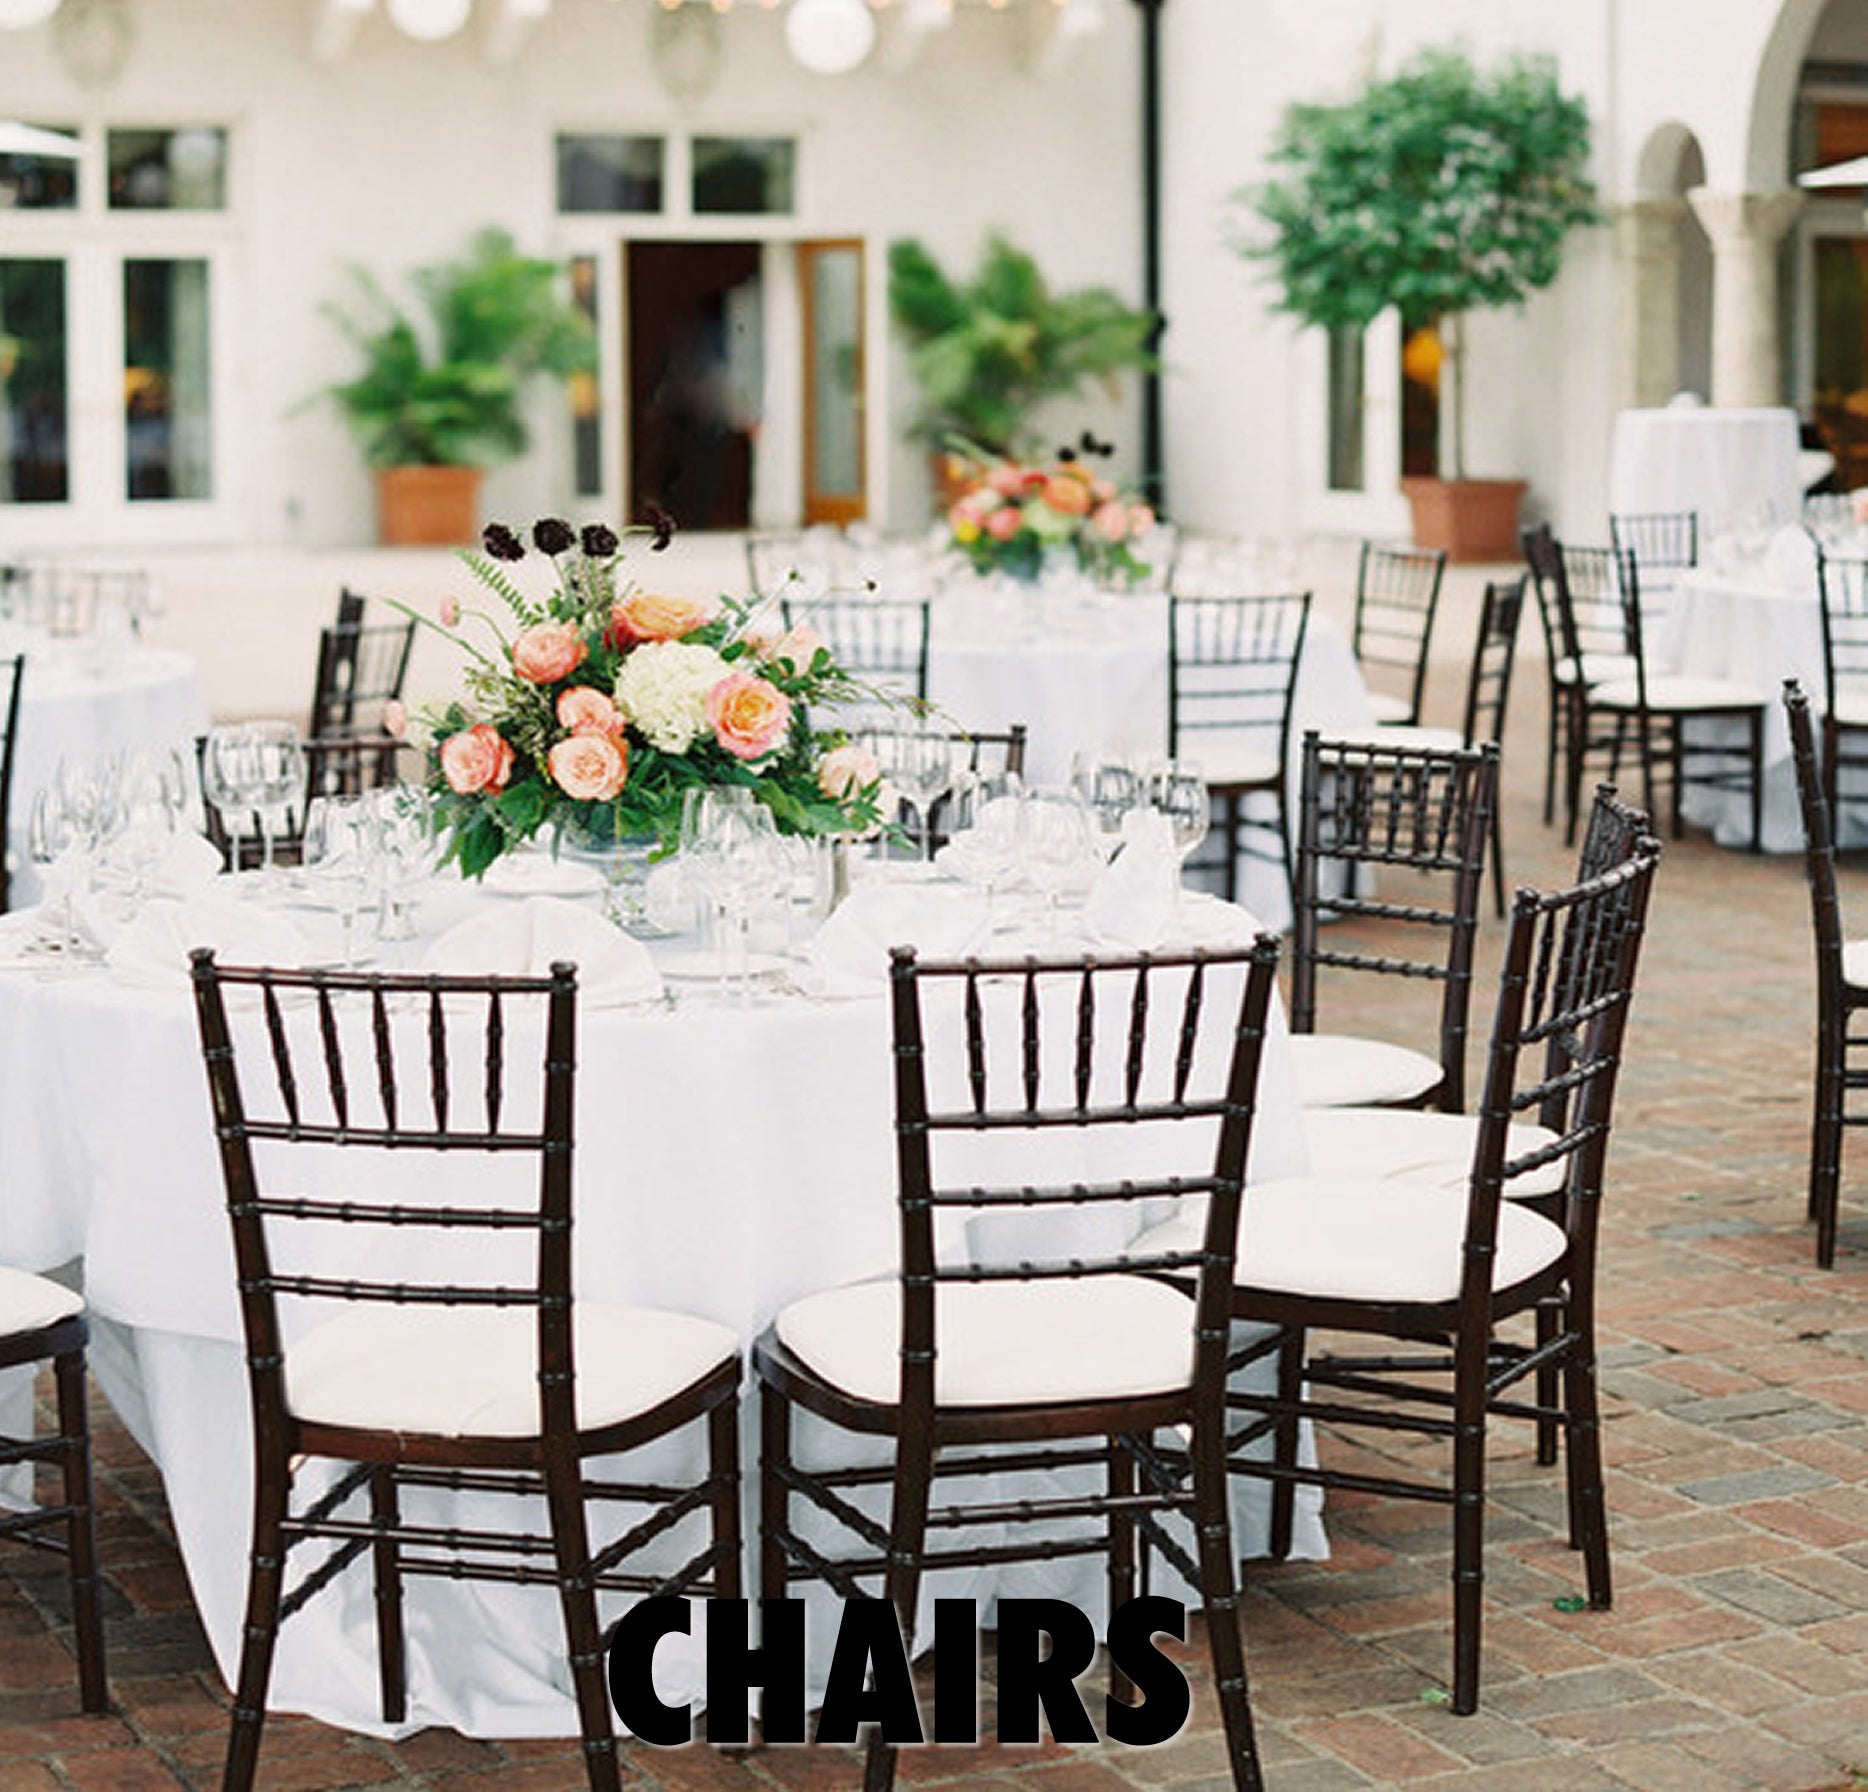 Quality Party Rentals - Chairs